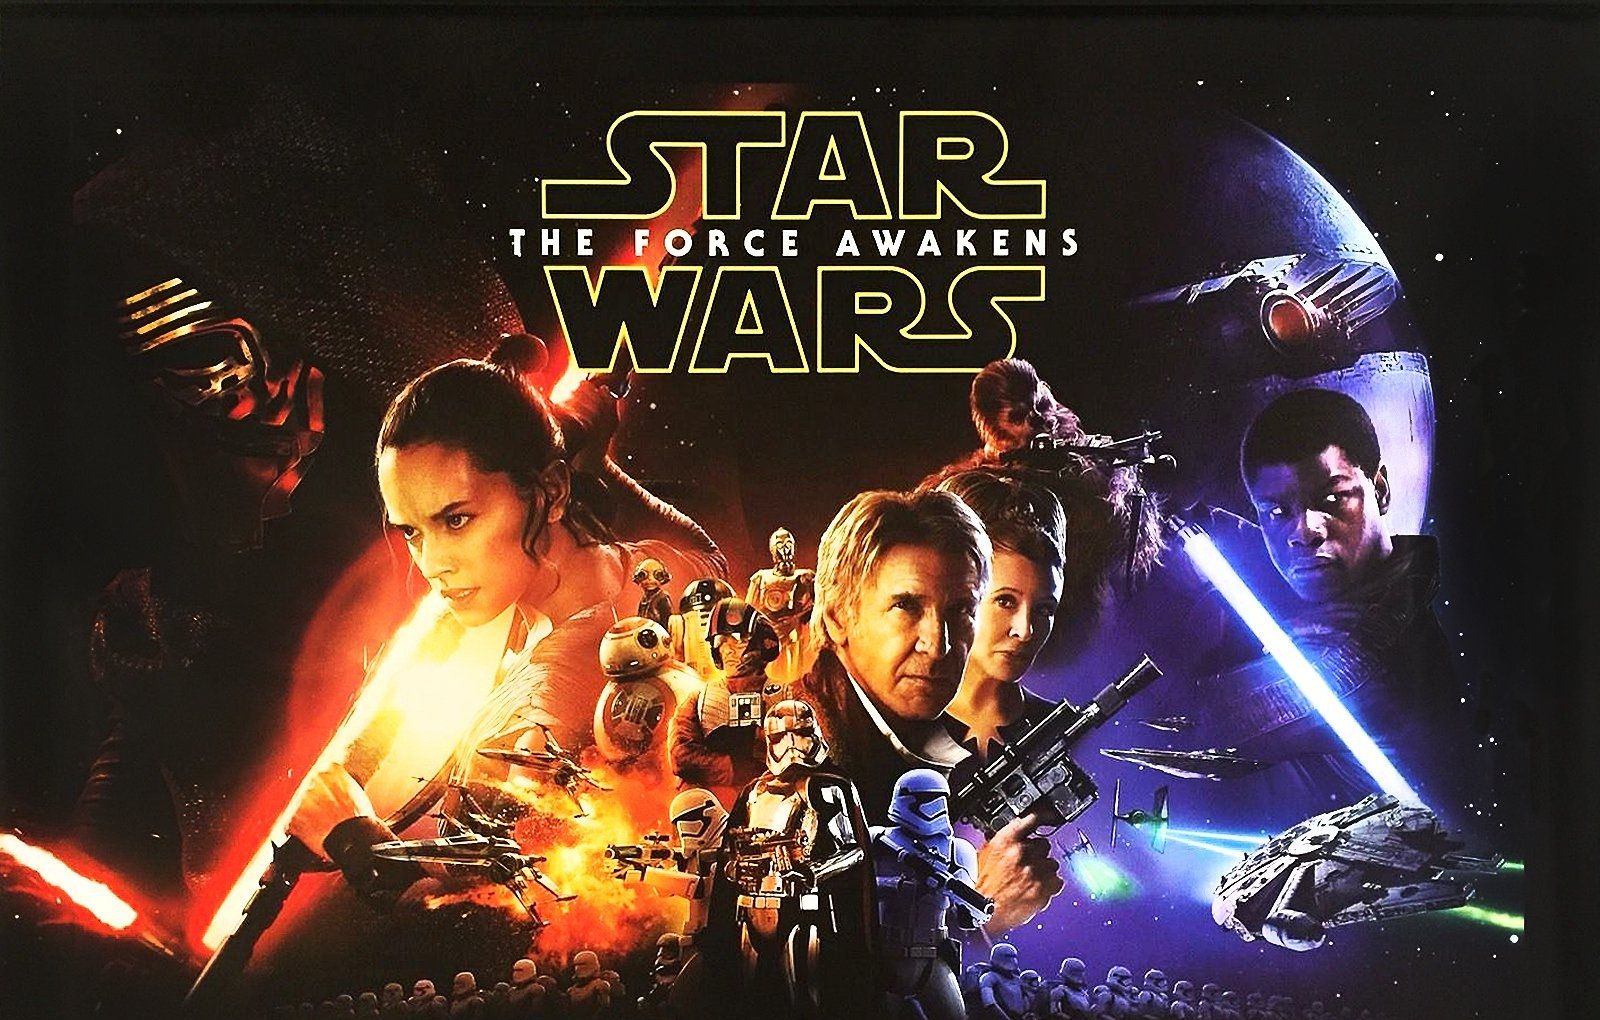 Star Wars Episode Vii: The Force Awakens Wallpapers